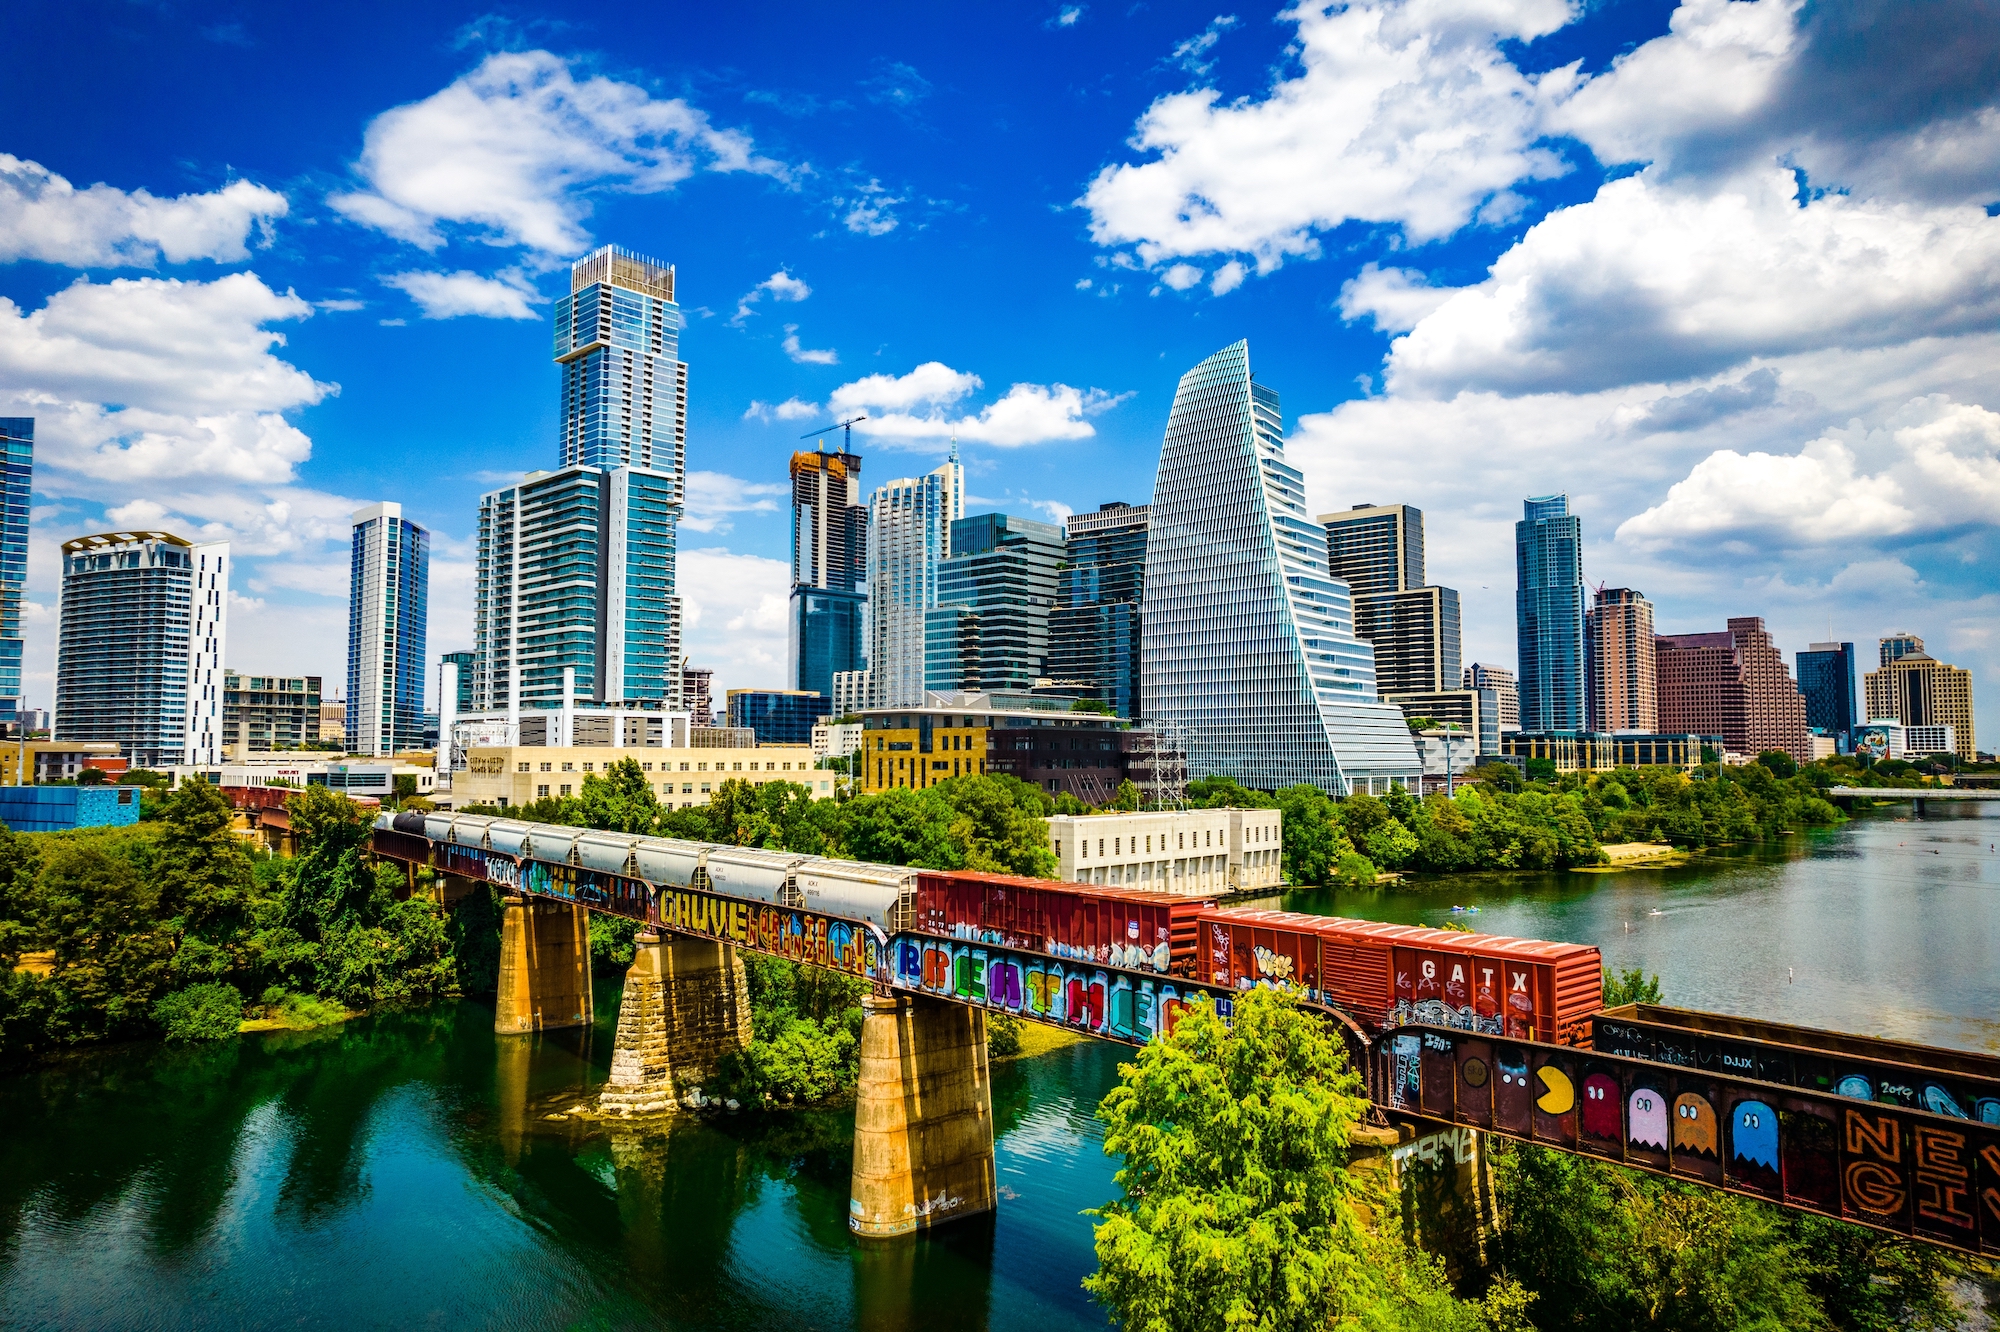 A photo of the Austin skyline is shown.